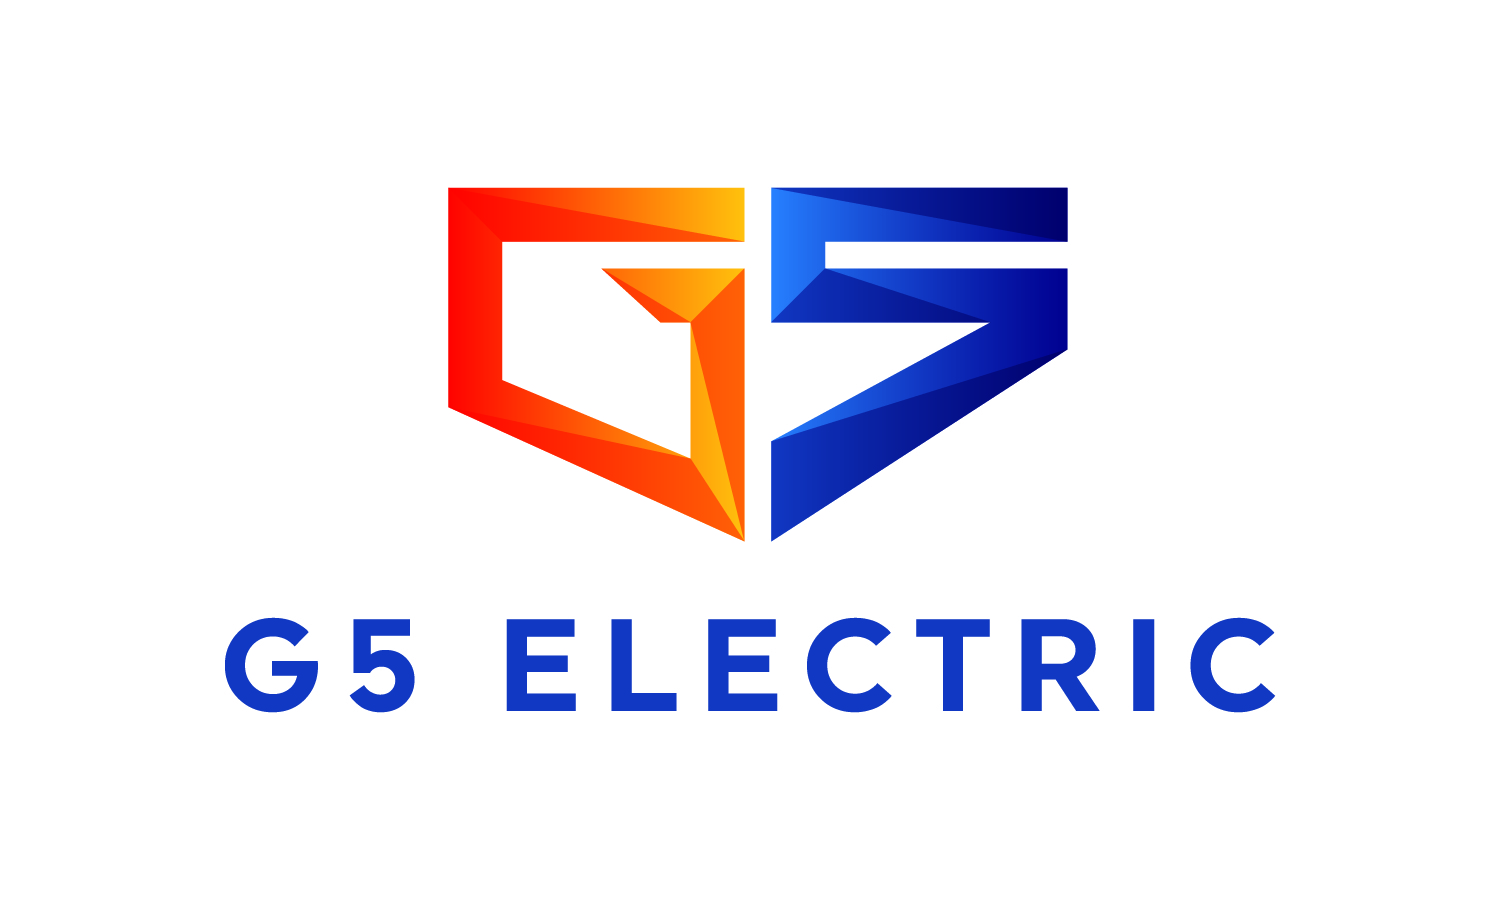 G5 Electric